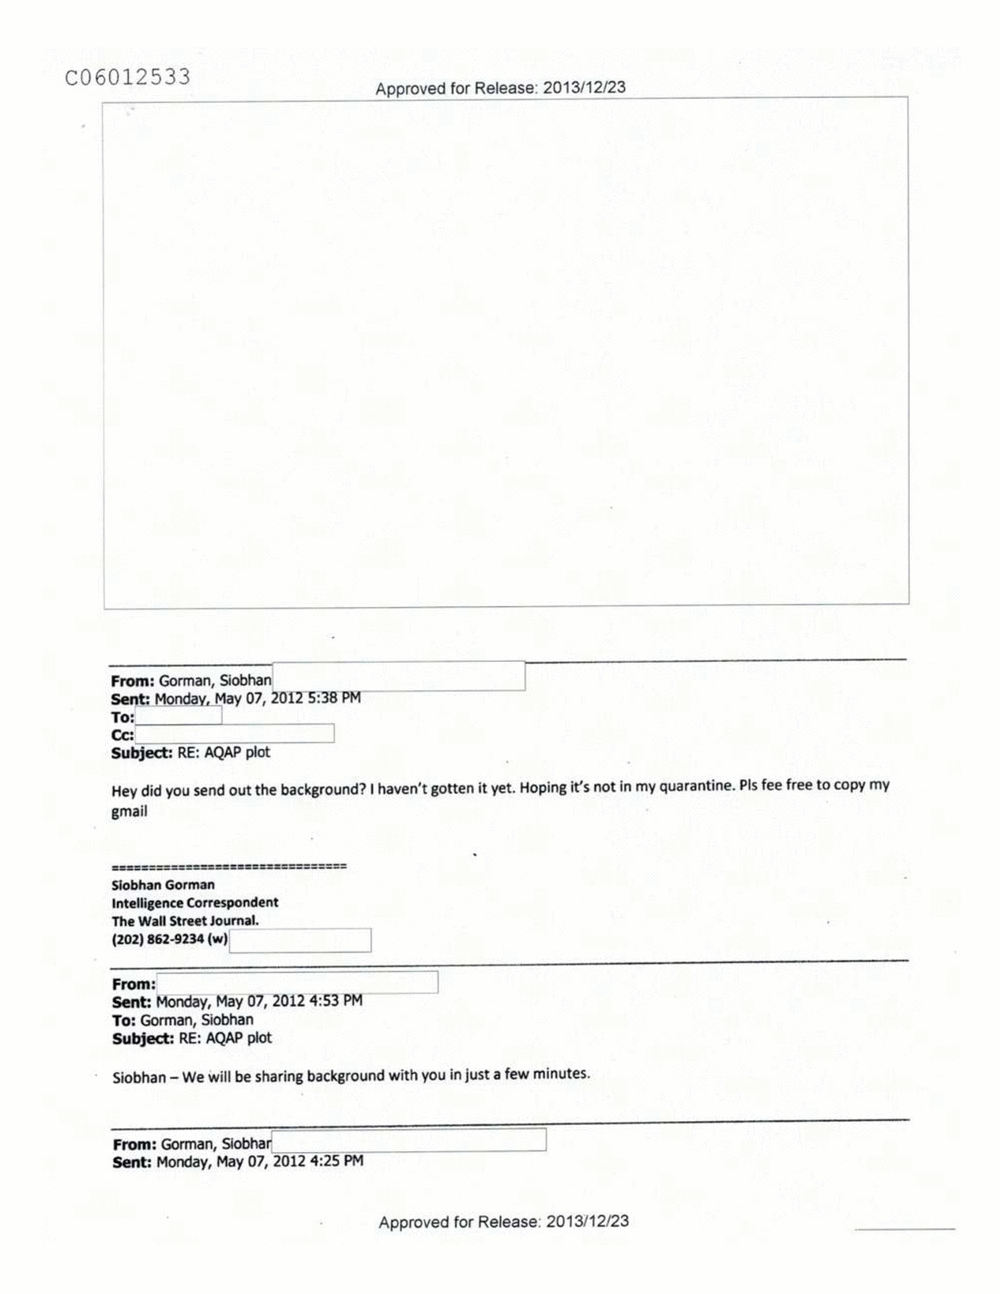 Page 65 from Email Correspondence Between Reporters and CIA Flacks